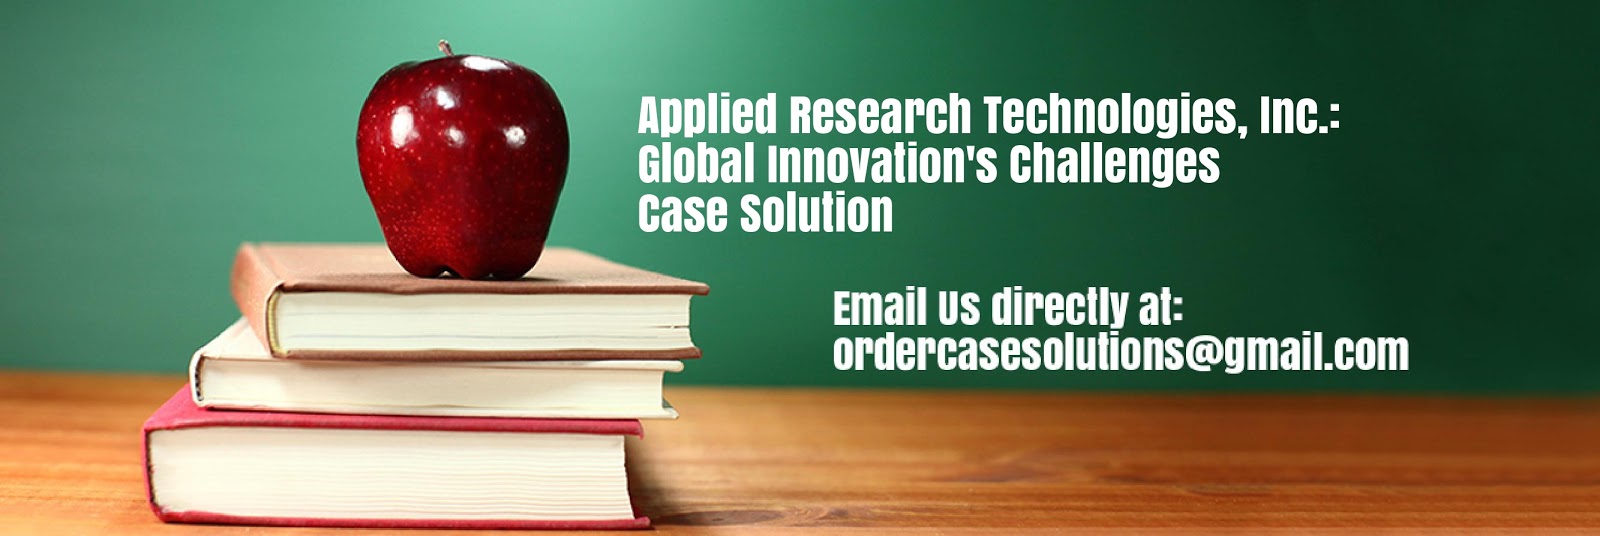 applied research technologies inc case study analysis